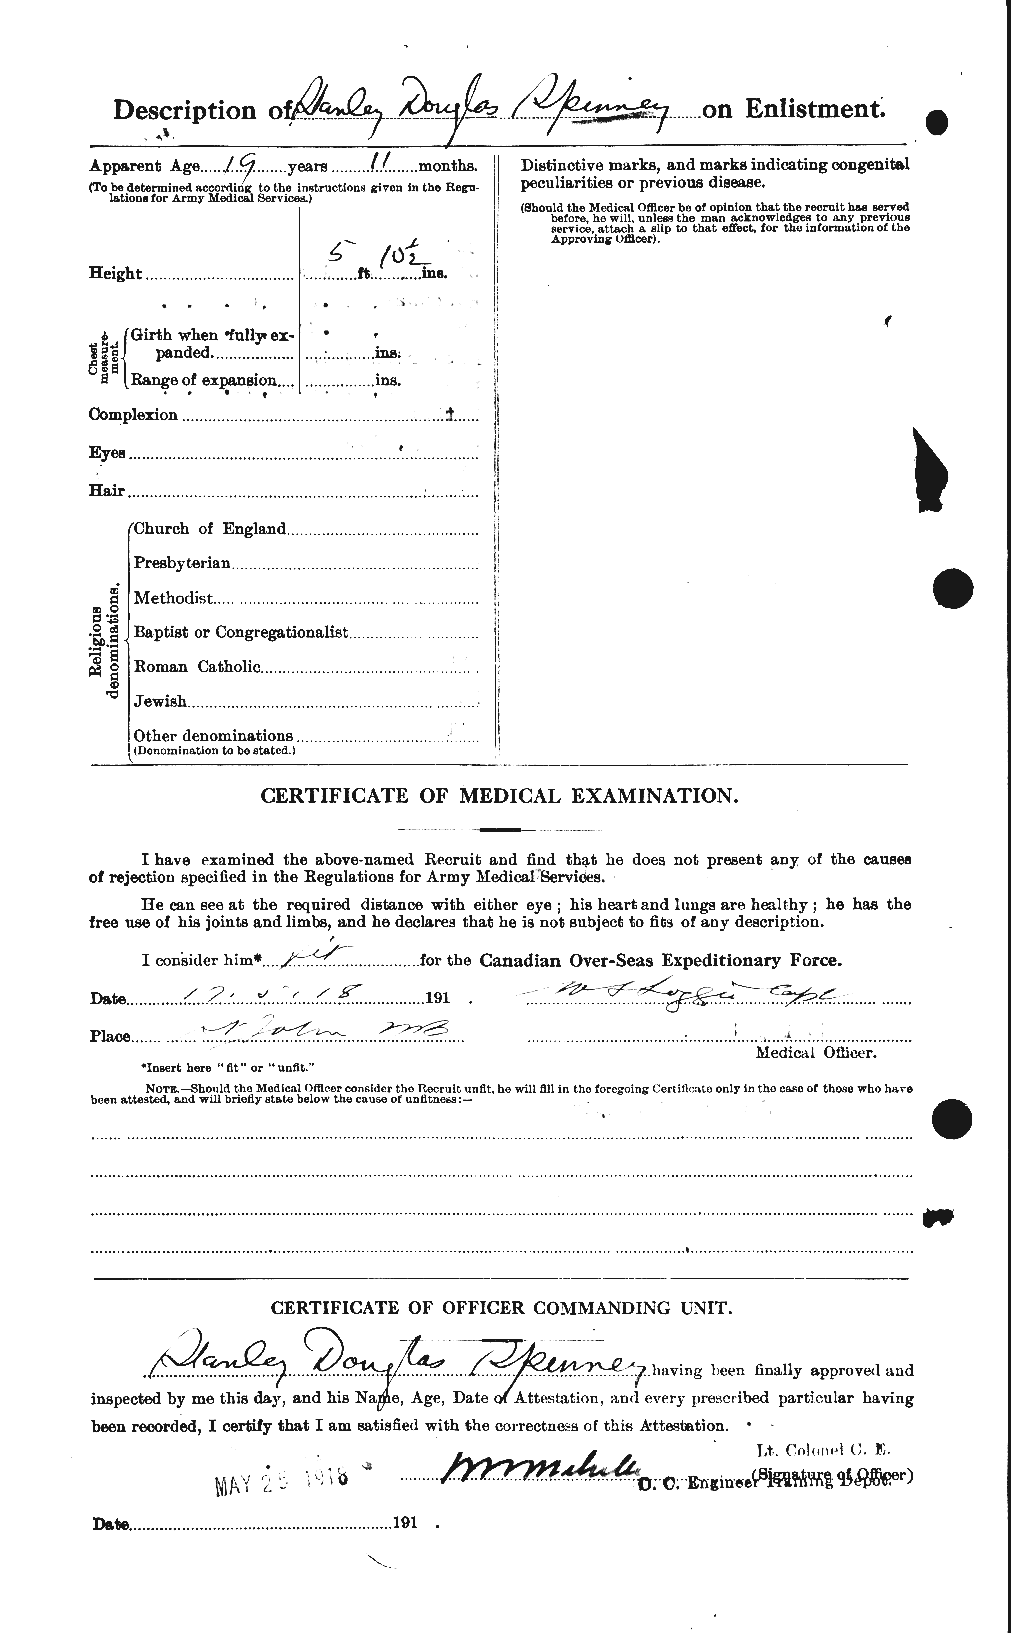 Personnel Records of the First World War - CEF 114406b